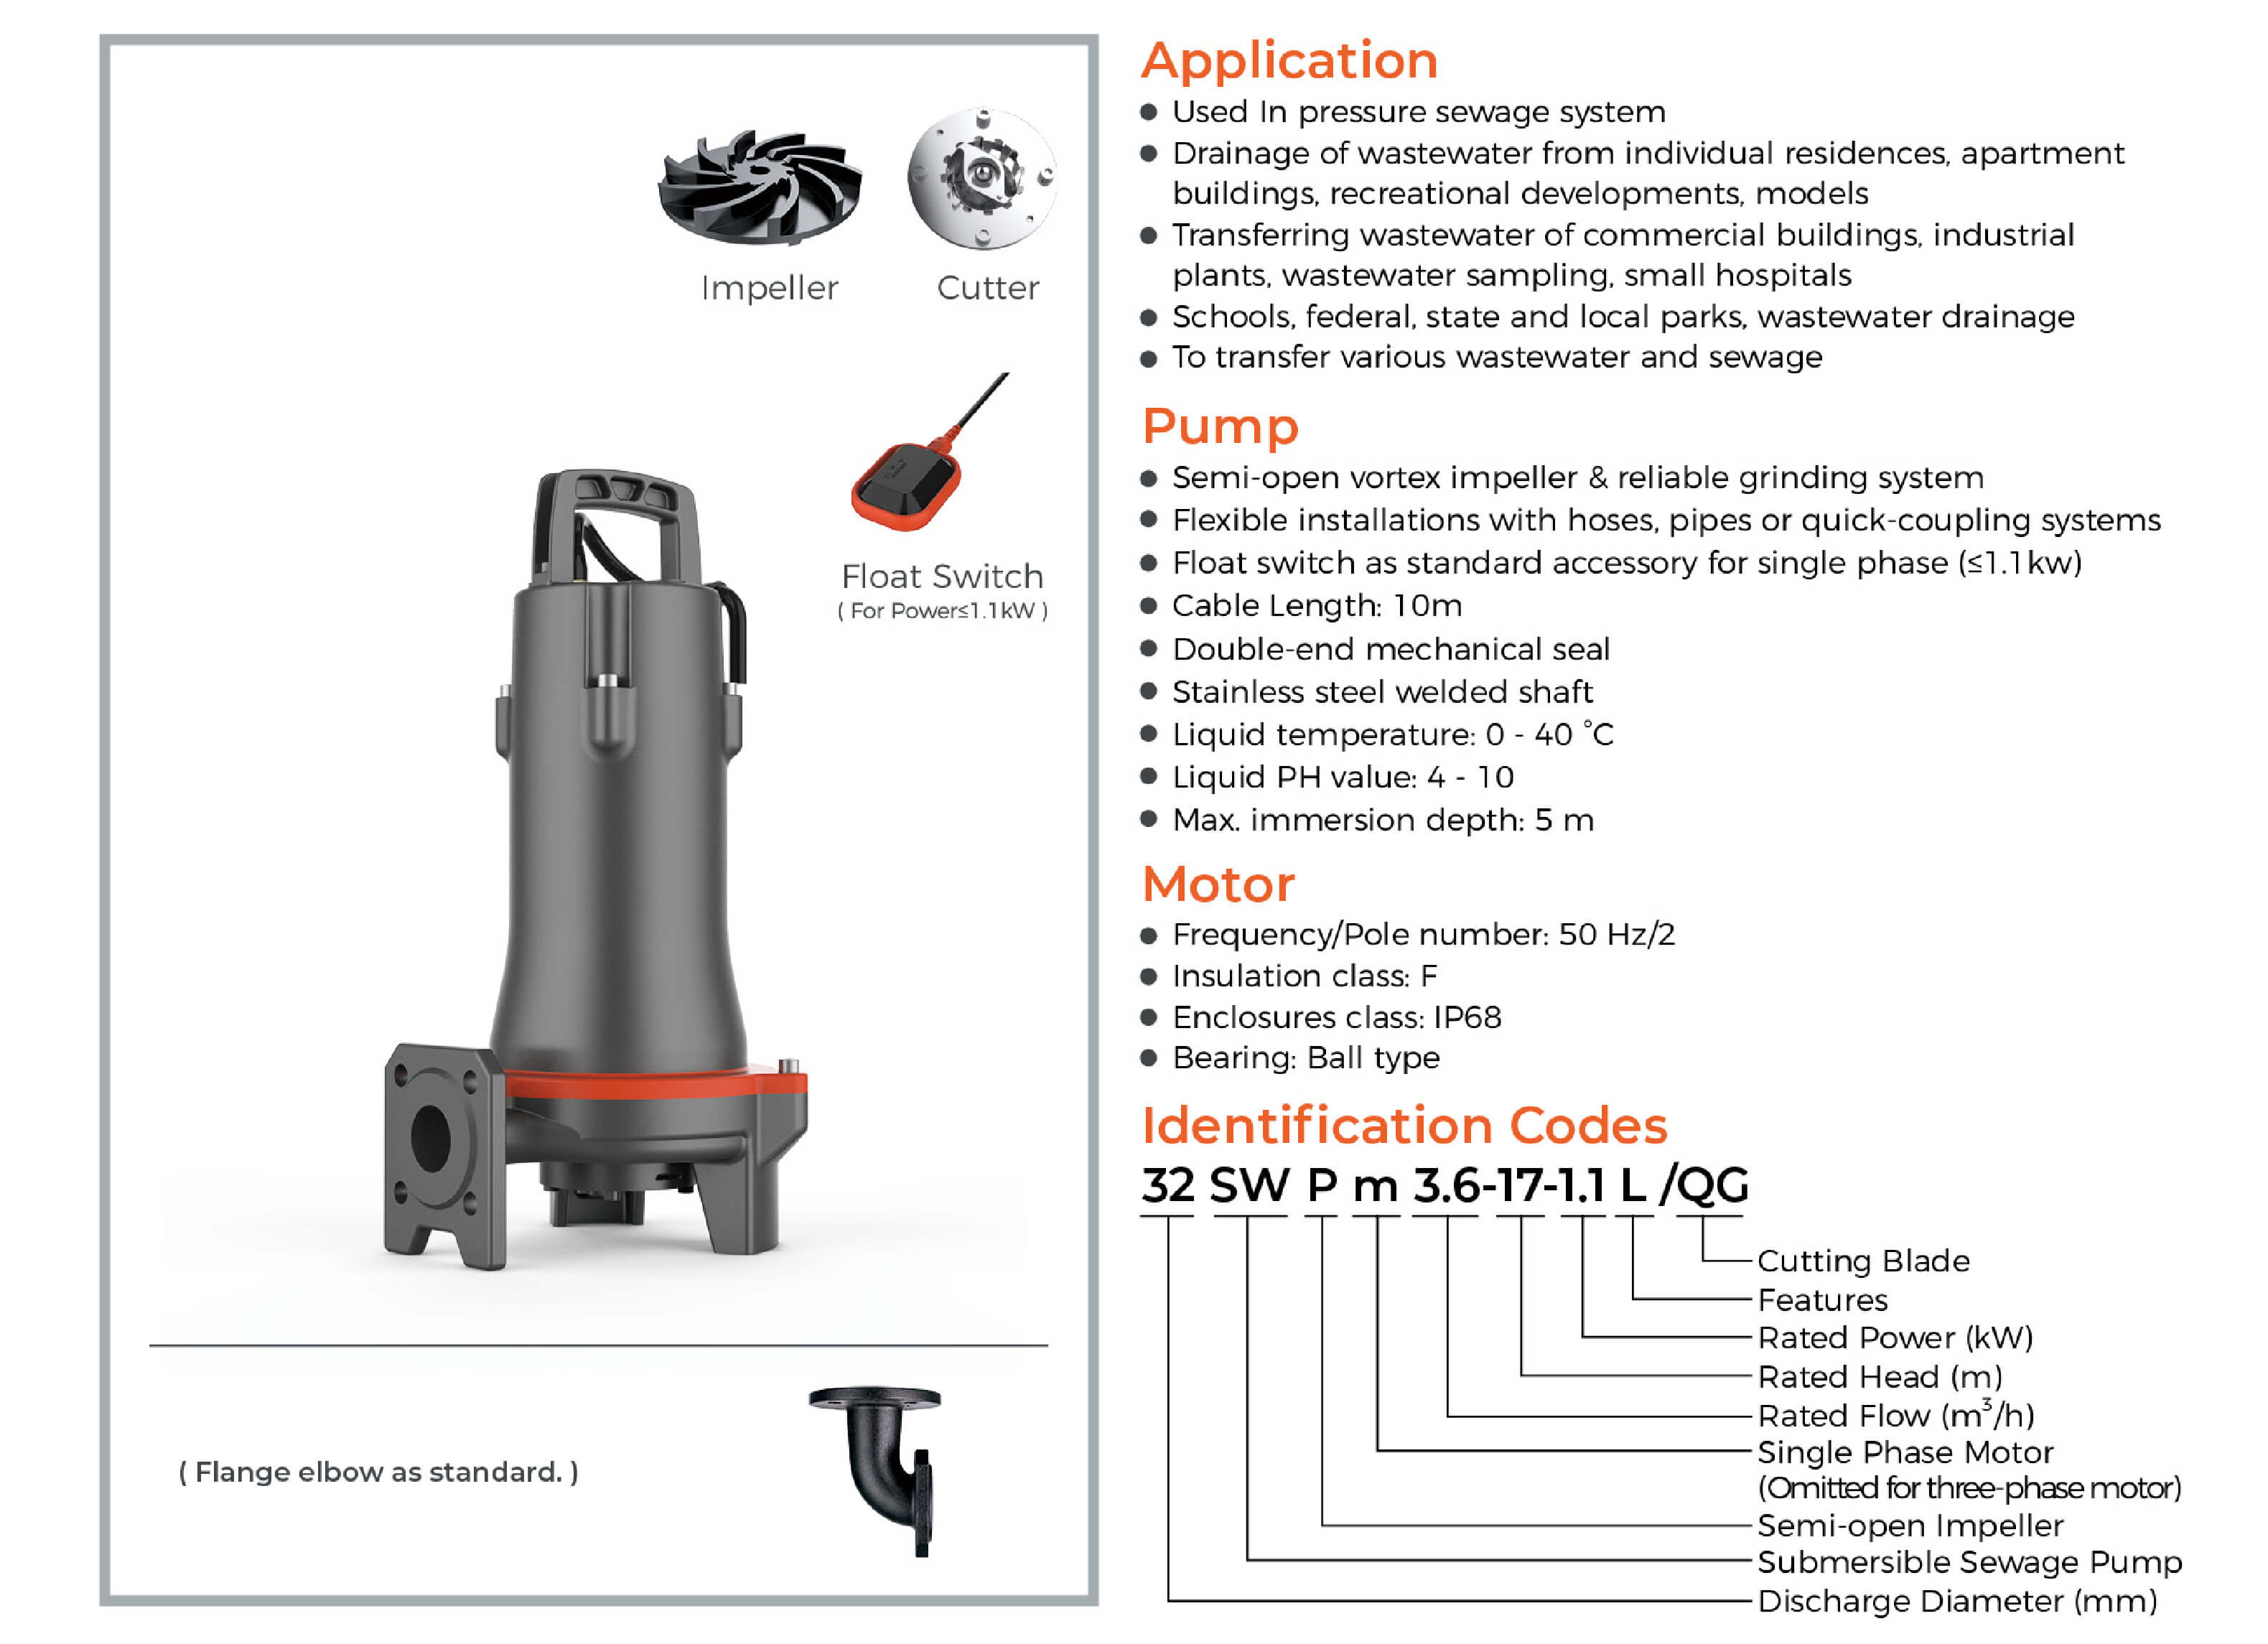 32SWP Submersible Sewage Pump Features